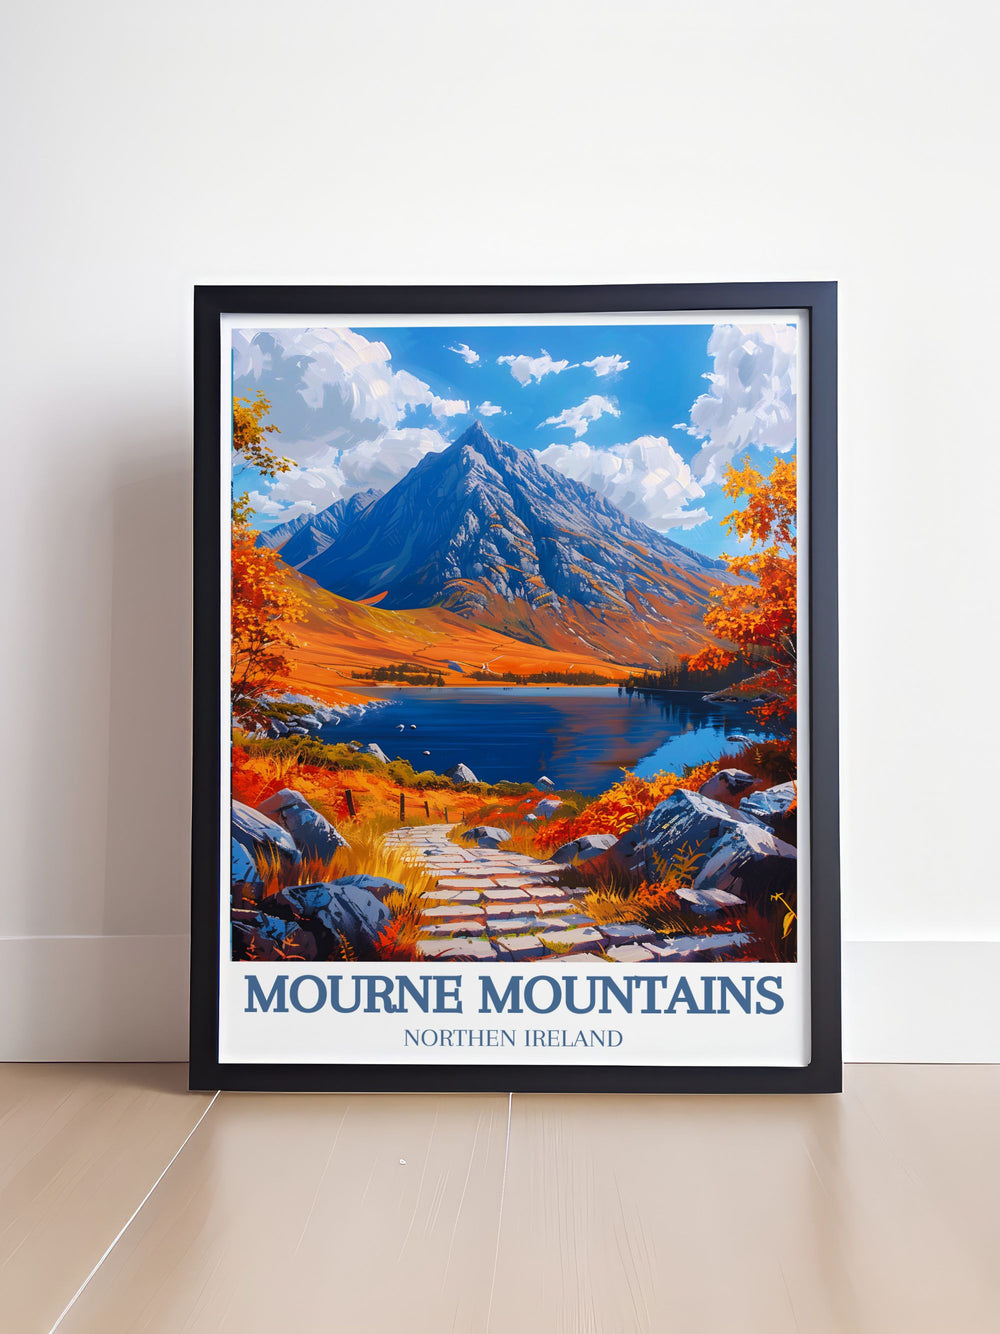 Featuring the iconic peaks and tranquil settings of the Mourne Mountains, this poster showcases the areas inviting landscapes, perfect for those who cherish natural and cultural destinations.